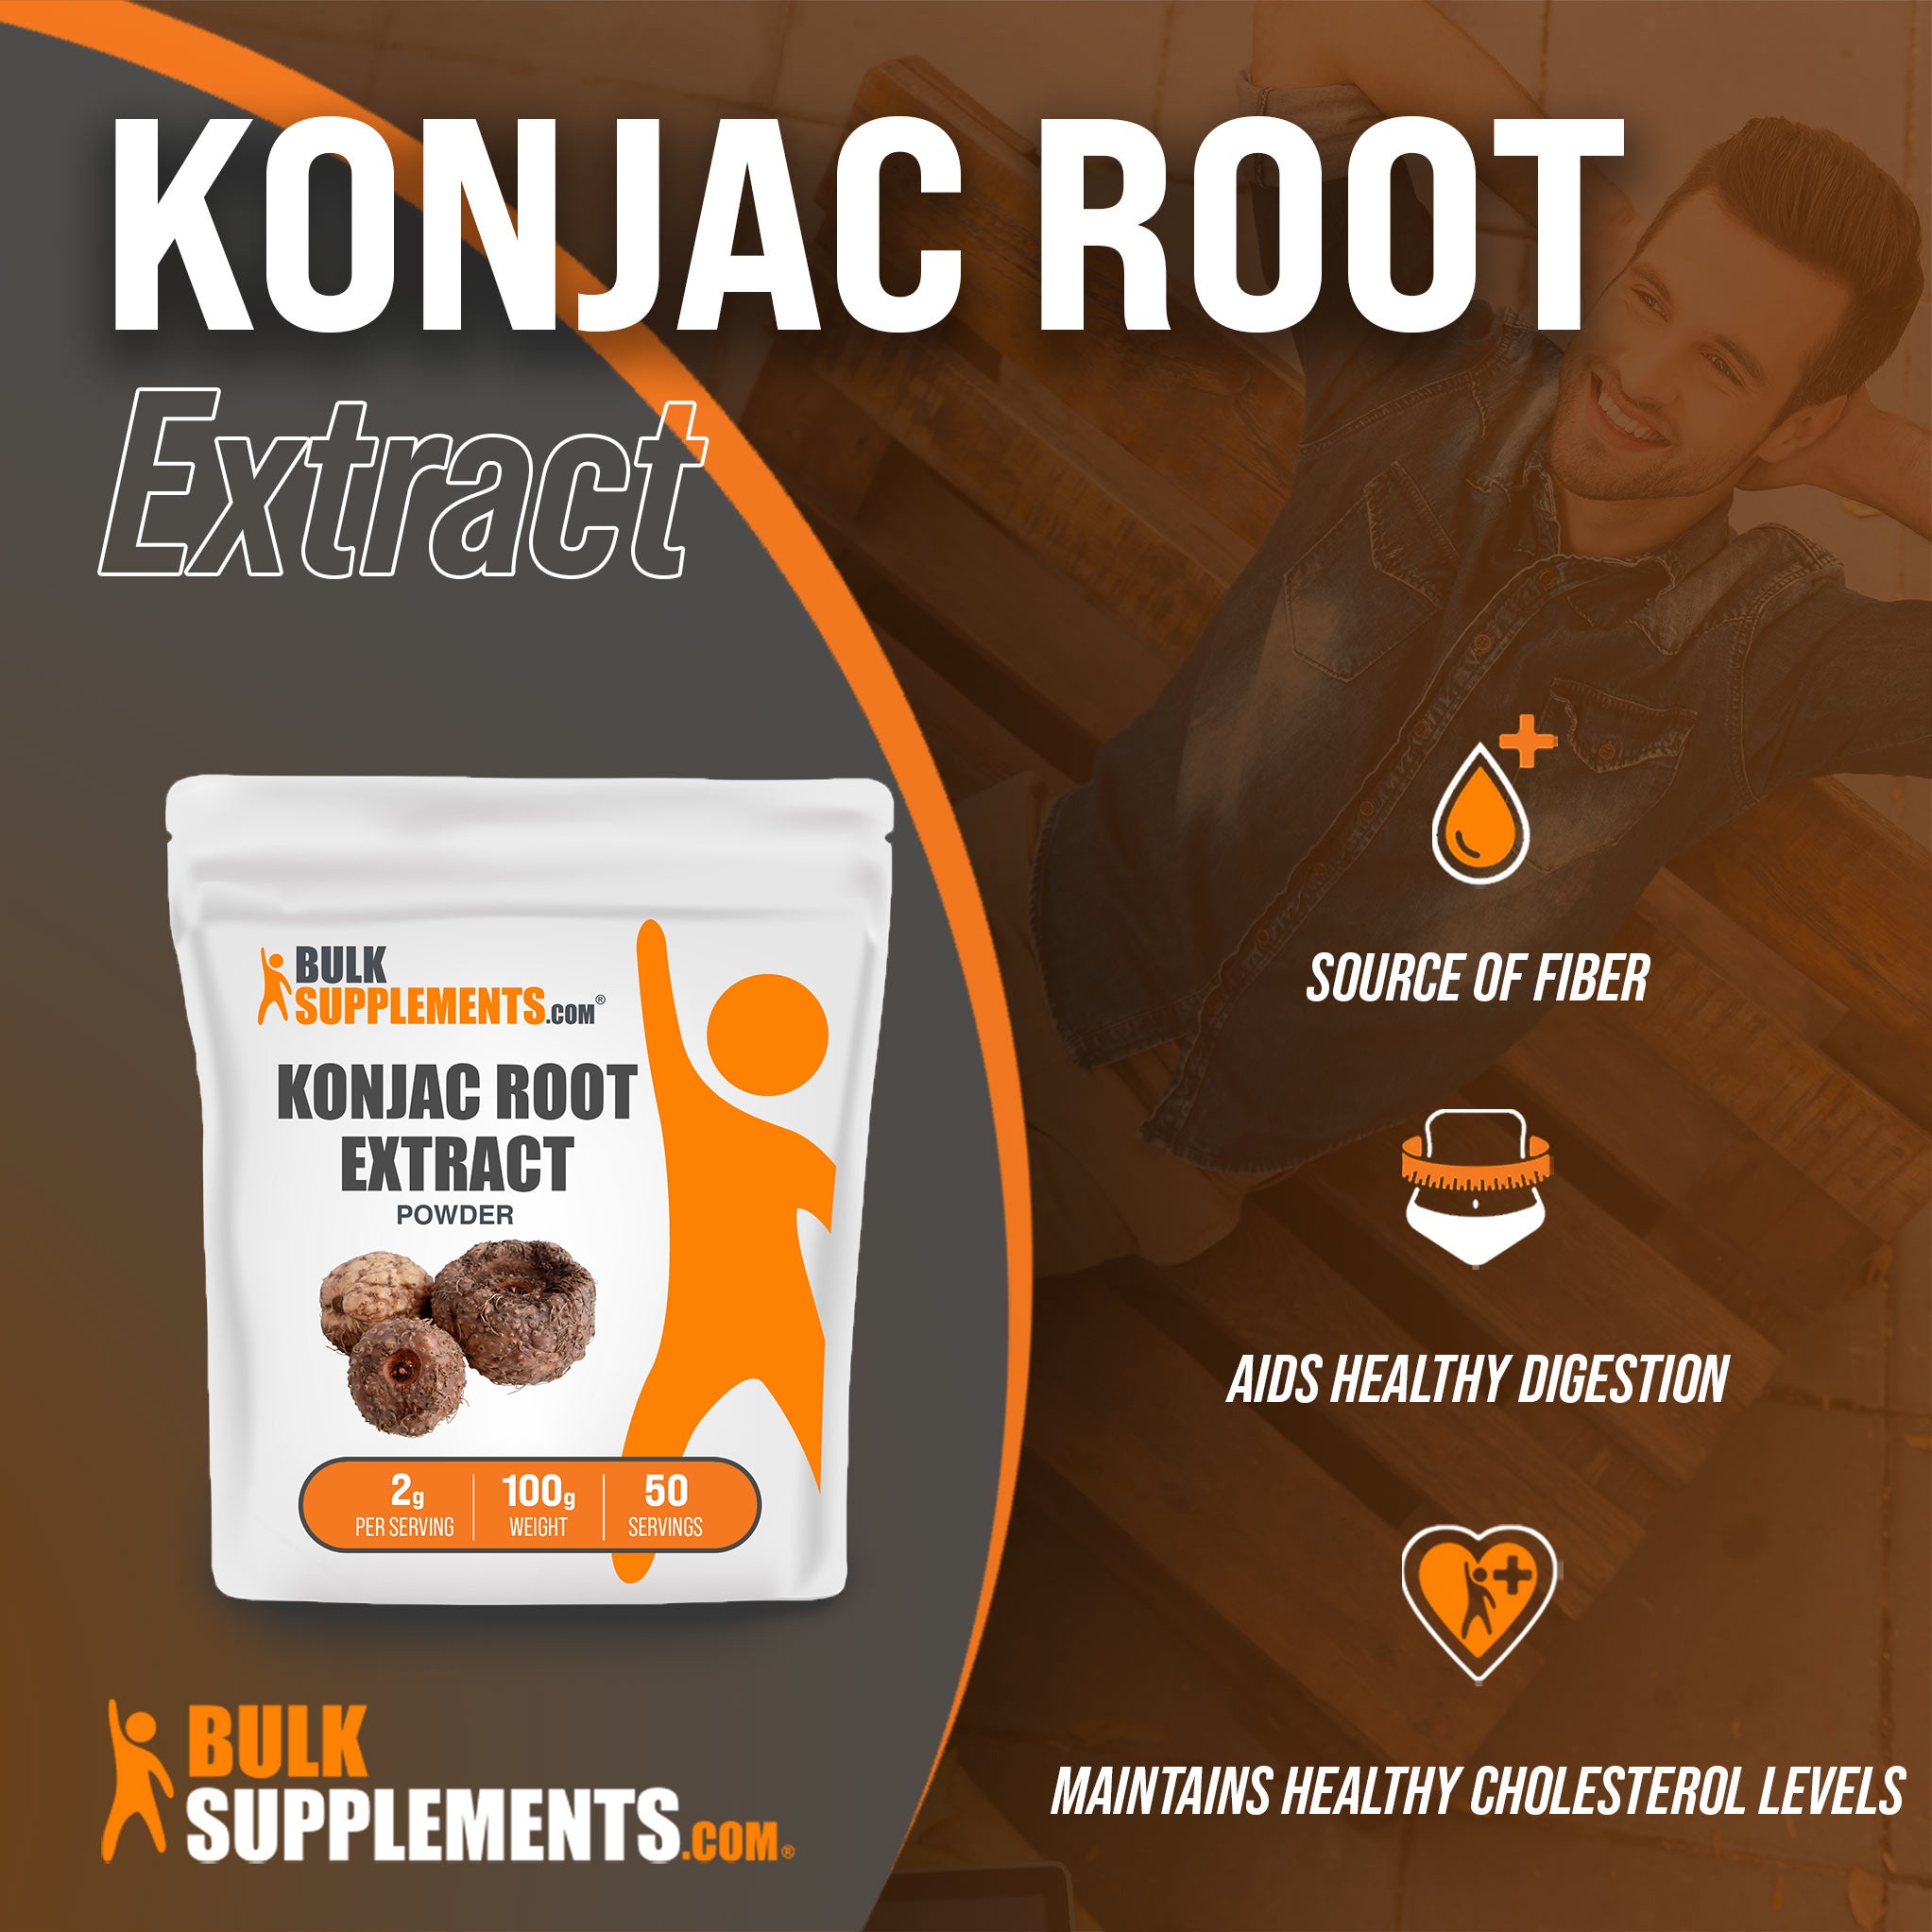 Benefits of Konjac Root Extract; source of fiber, aids healthy digestion, maintains healthy cholesterol levels